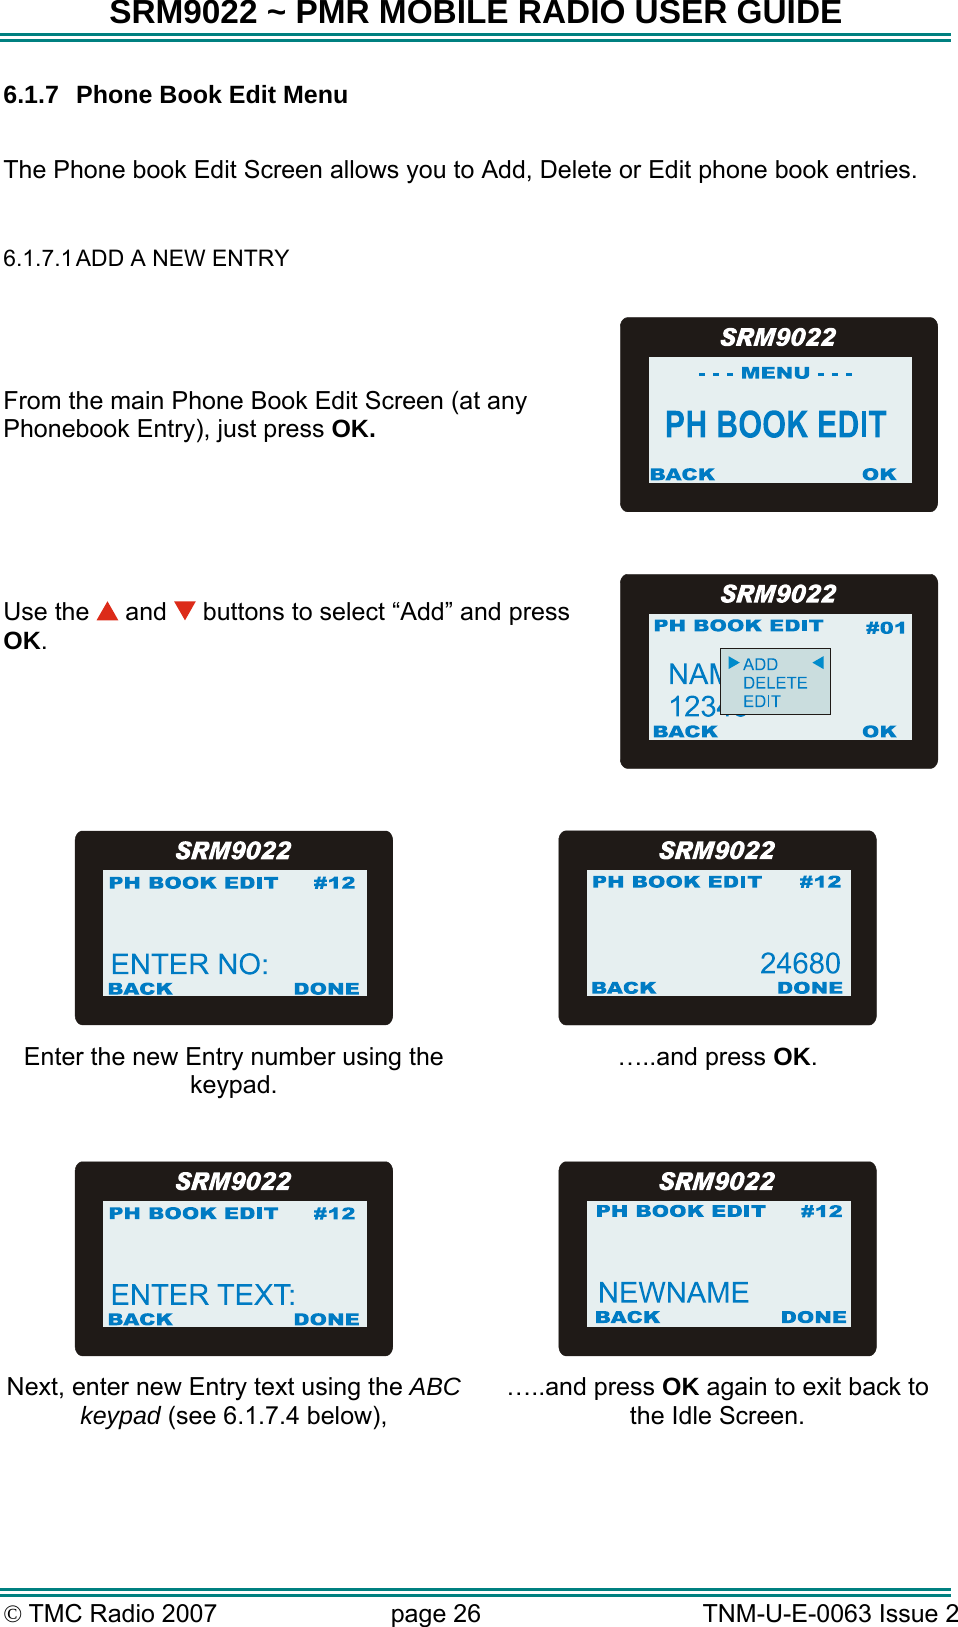 SRM9022 ~ PMR MOBILE RADIO USER GUIDE © TMC Radio 2007  page 26   TNM-U-E-0063 Issue 2 6.1.7  Phone Book Edit Menu  The Phone book Edit Screen allows you to Add, Delete or Edit phone book entries.  6.1.7.1 ADD A NEW ENTRY   From the main Phone Book Edit Screen (at any Phonebook Entry), just press OK.    Use the   and   buttons to select “Add” and press OK.      Enter the new Entry number using the keypad. …..and press OK.     Next, enter new Entry text using the ABC keypad (see 6.1.7.4 below), …..and press OK again to exit back to the Idle Screen.   